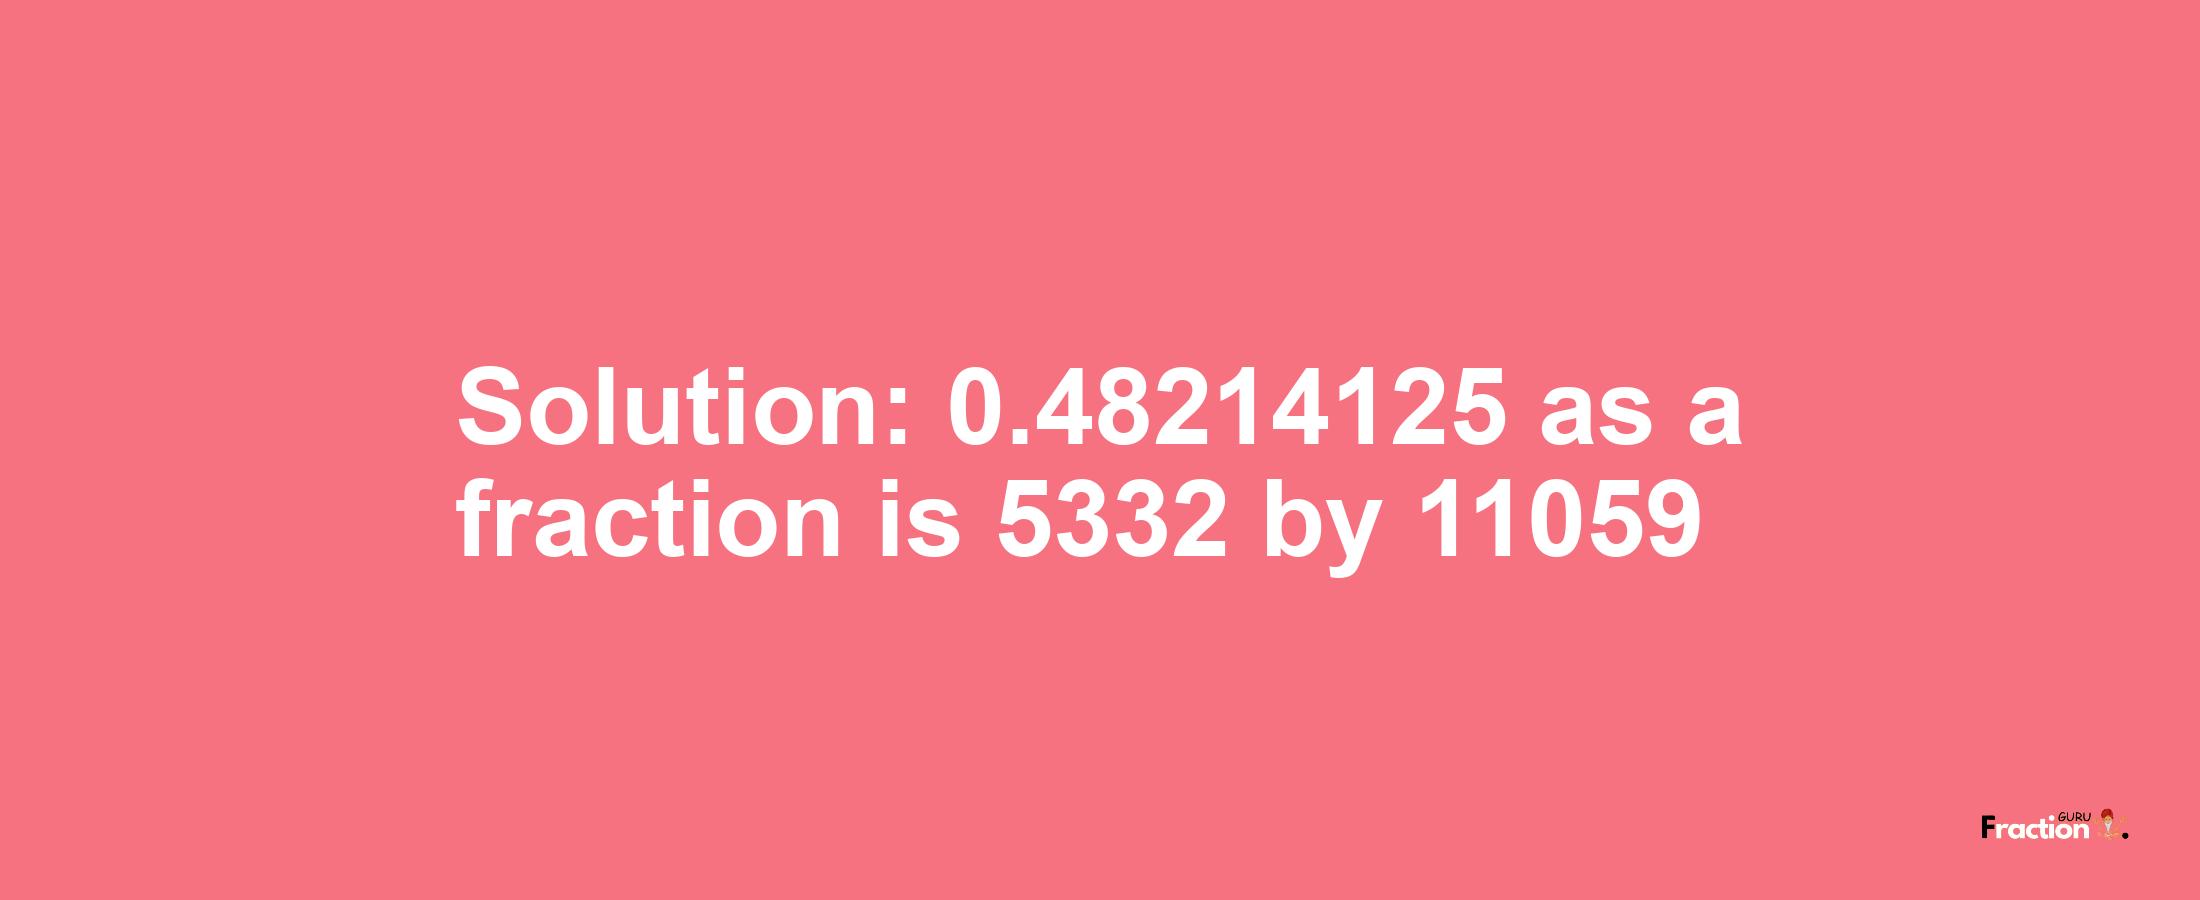 Solution:0.48214125 as a fraction is 5332/11059